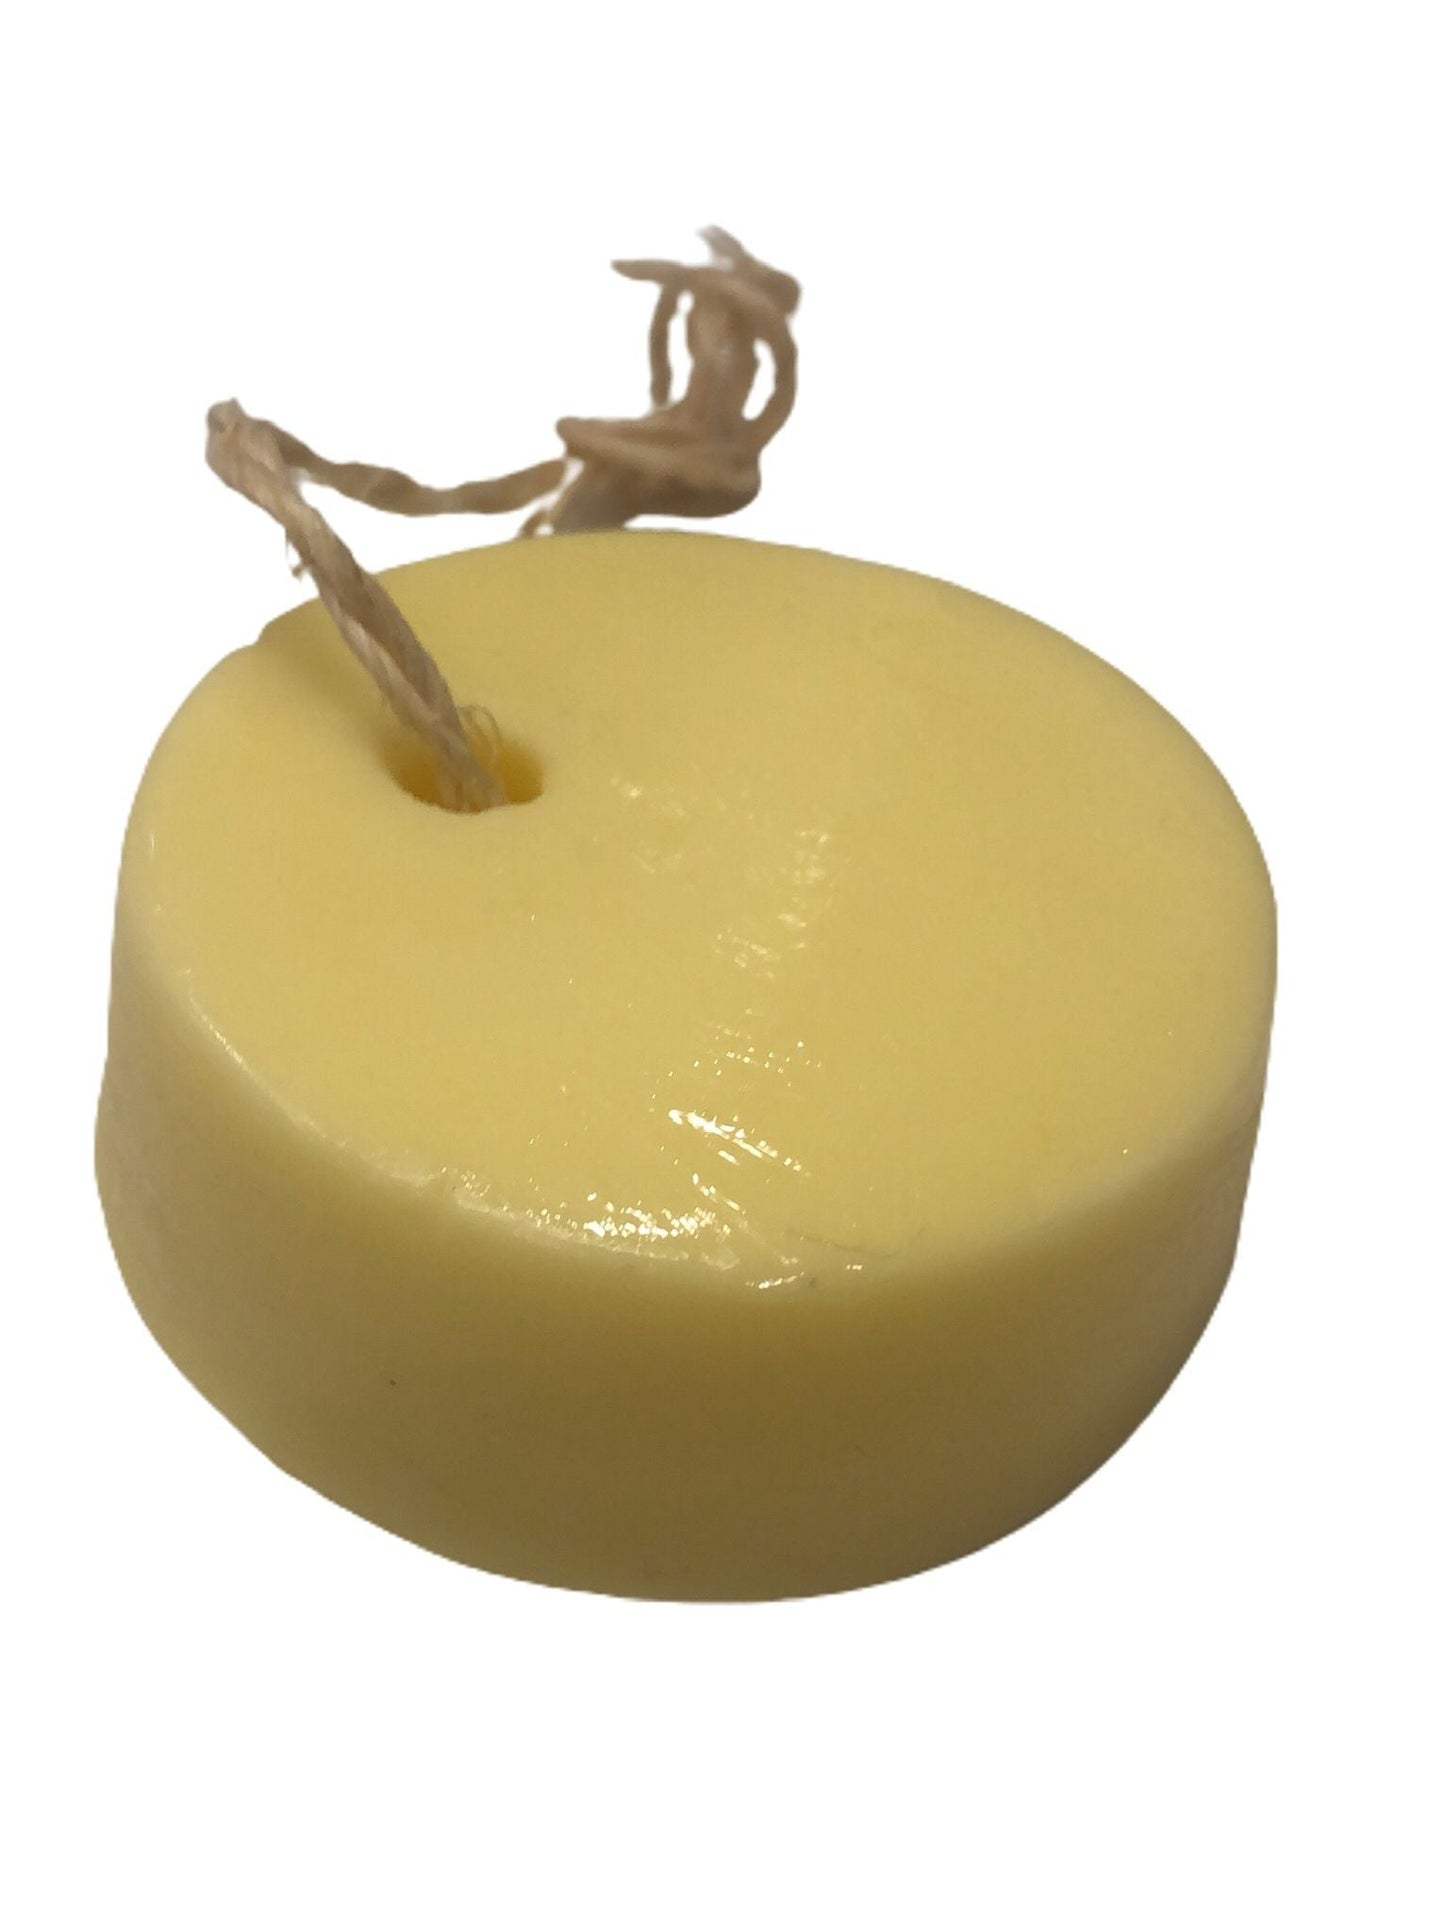 reassuring soap bar. wheat, olive, and almond oil. by benat